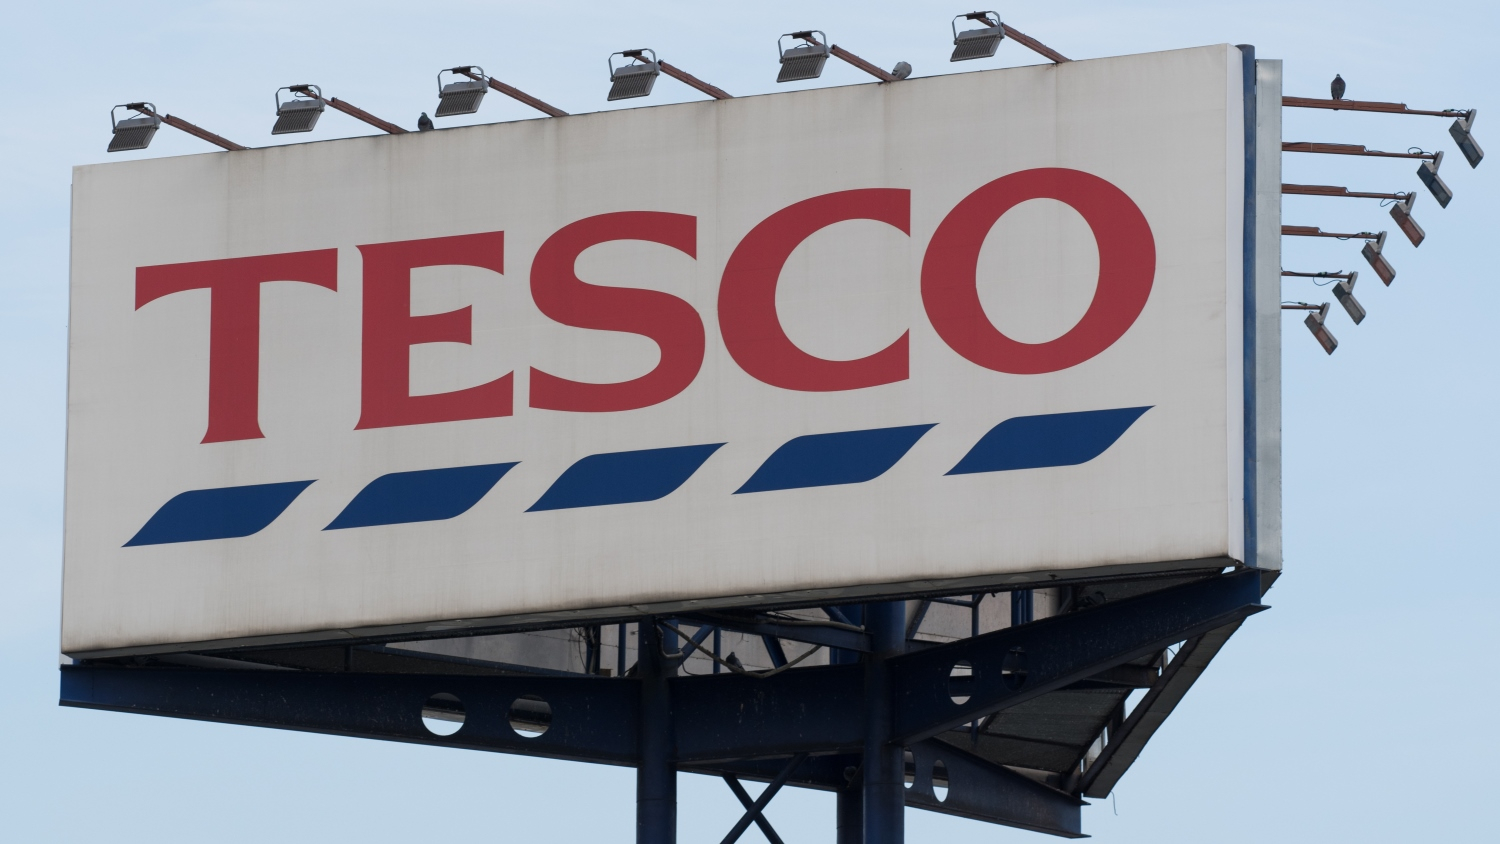 News Article Echo Investment investment mixed-use residential retail Tesco